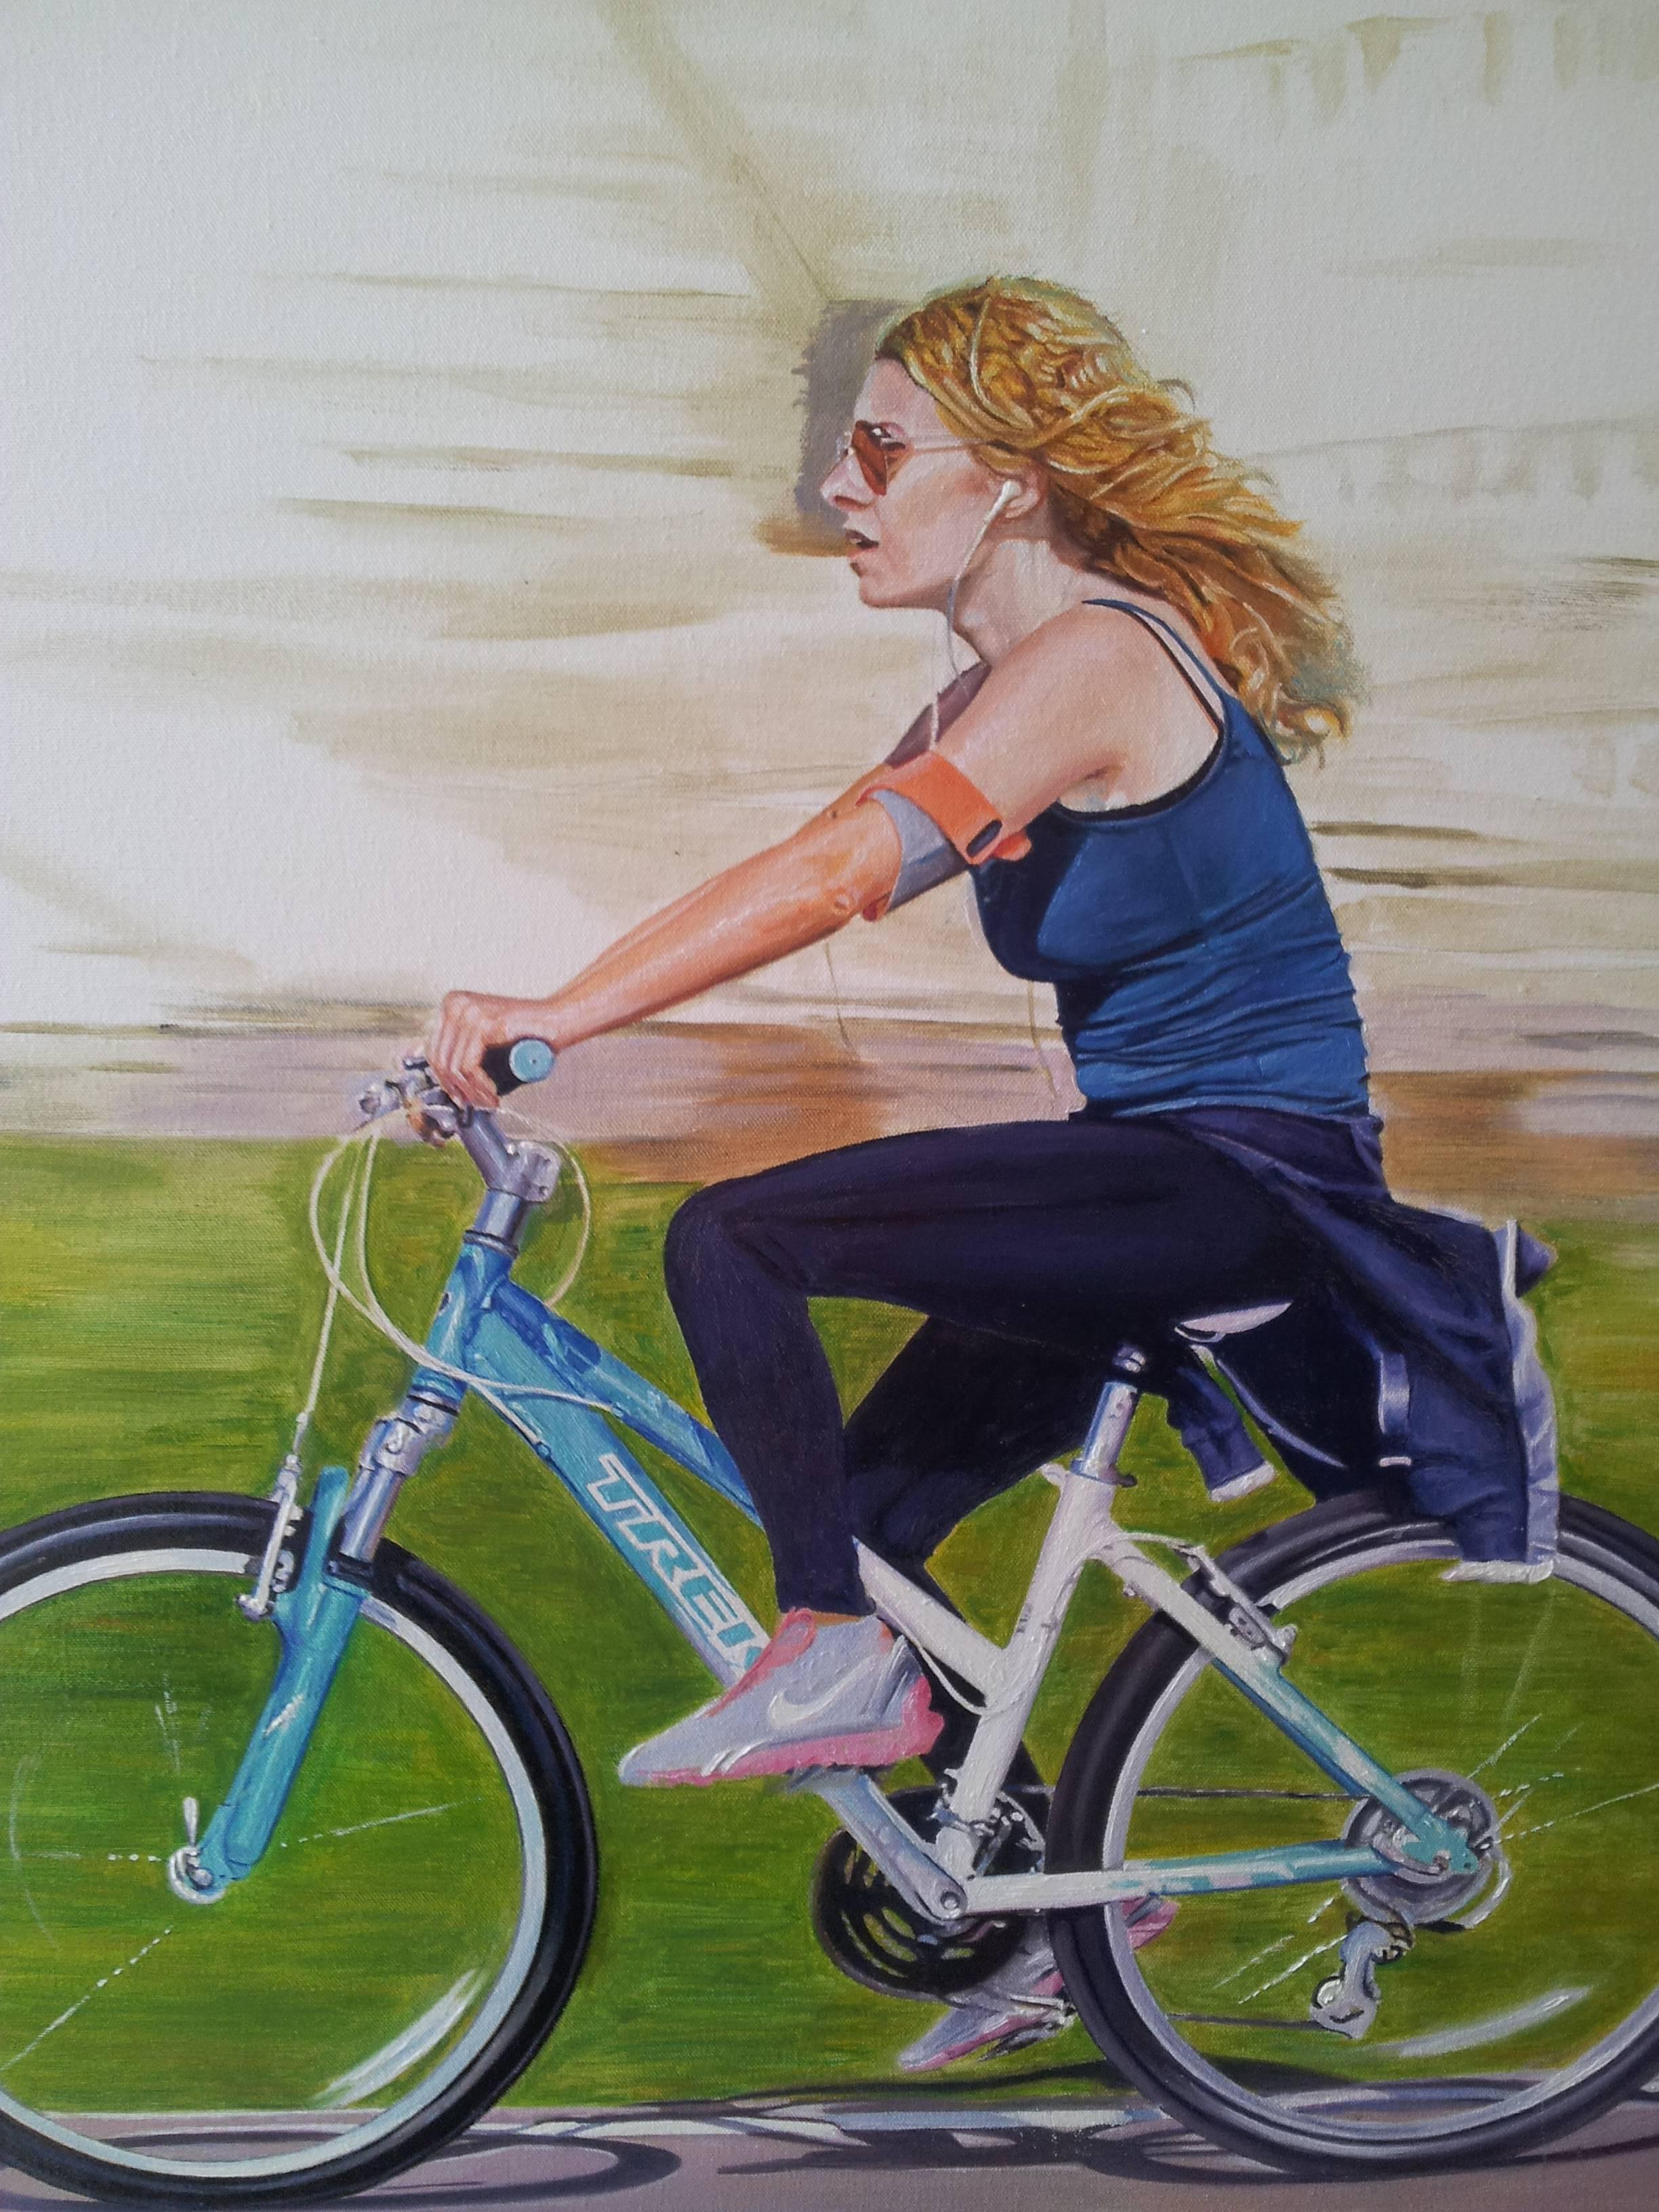 Girl on Bicycle  - Painting by Gustavo Valenzuela